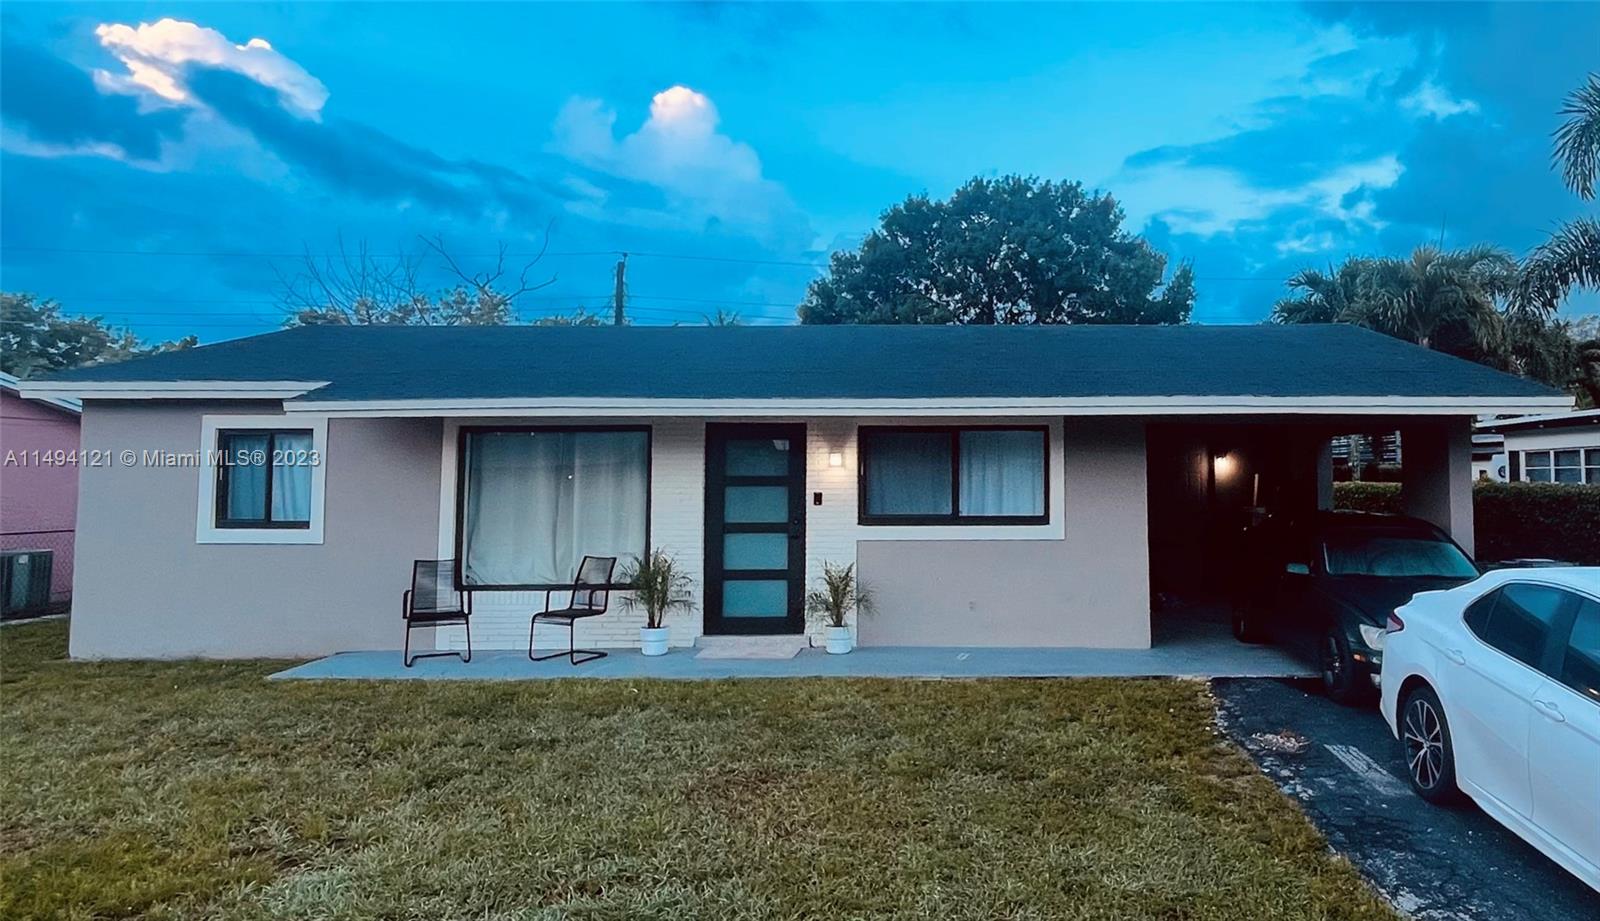 Beautiful Spacious Home 3/2, New Impacted Windows and Door, Remodel Kitchen, New lighting, Big Back Yard. No HOA, Well kept home.